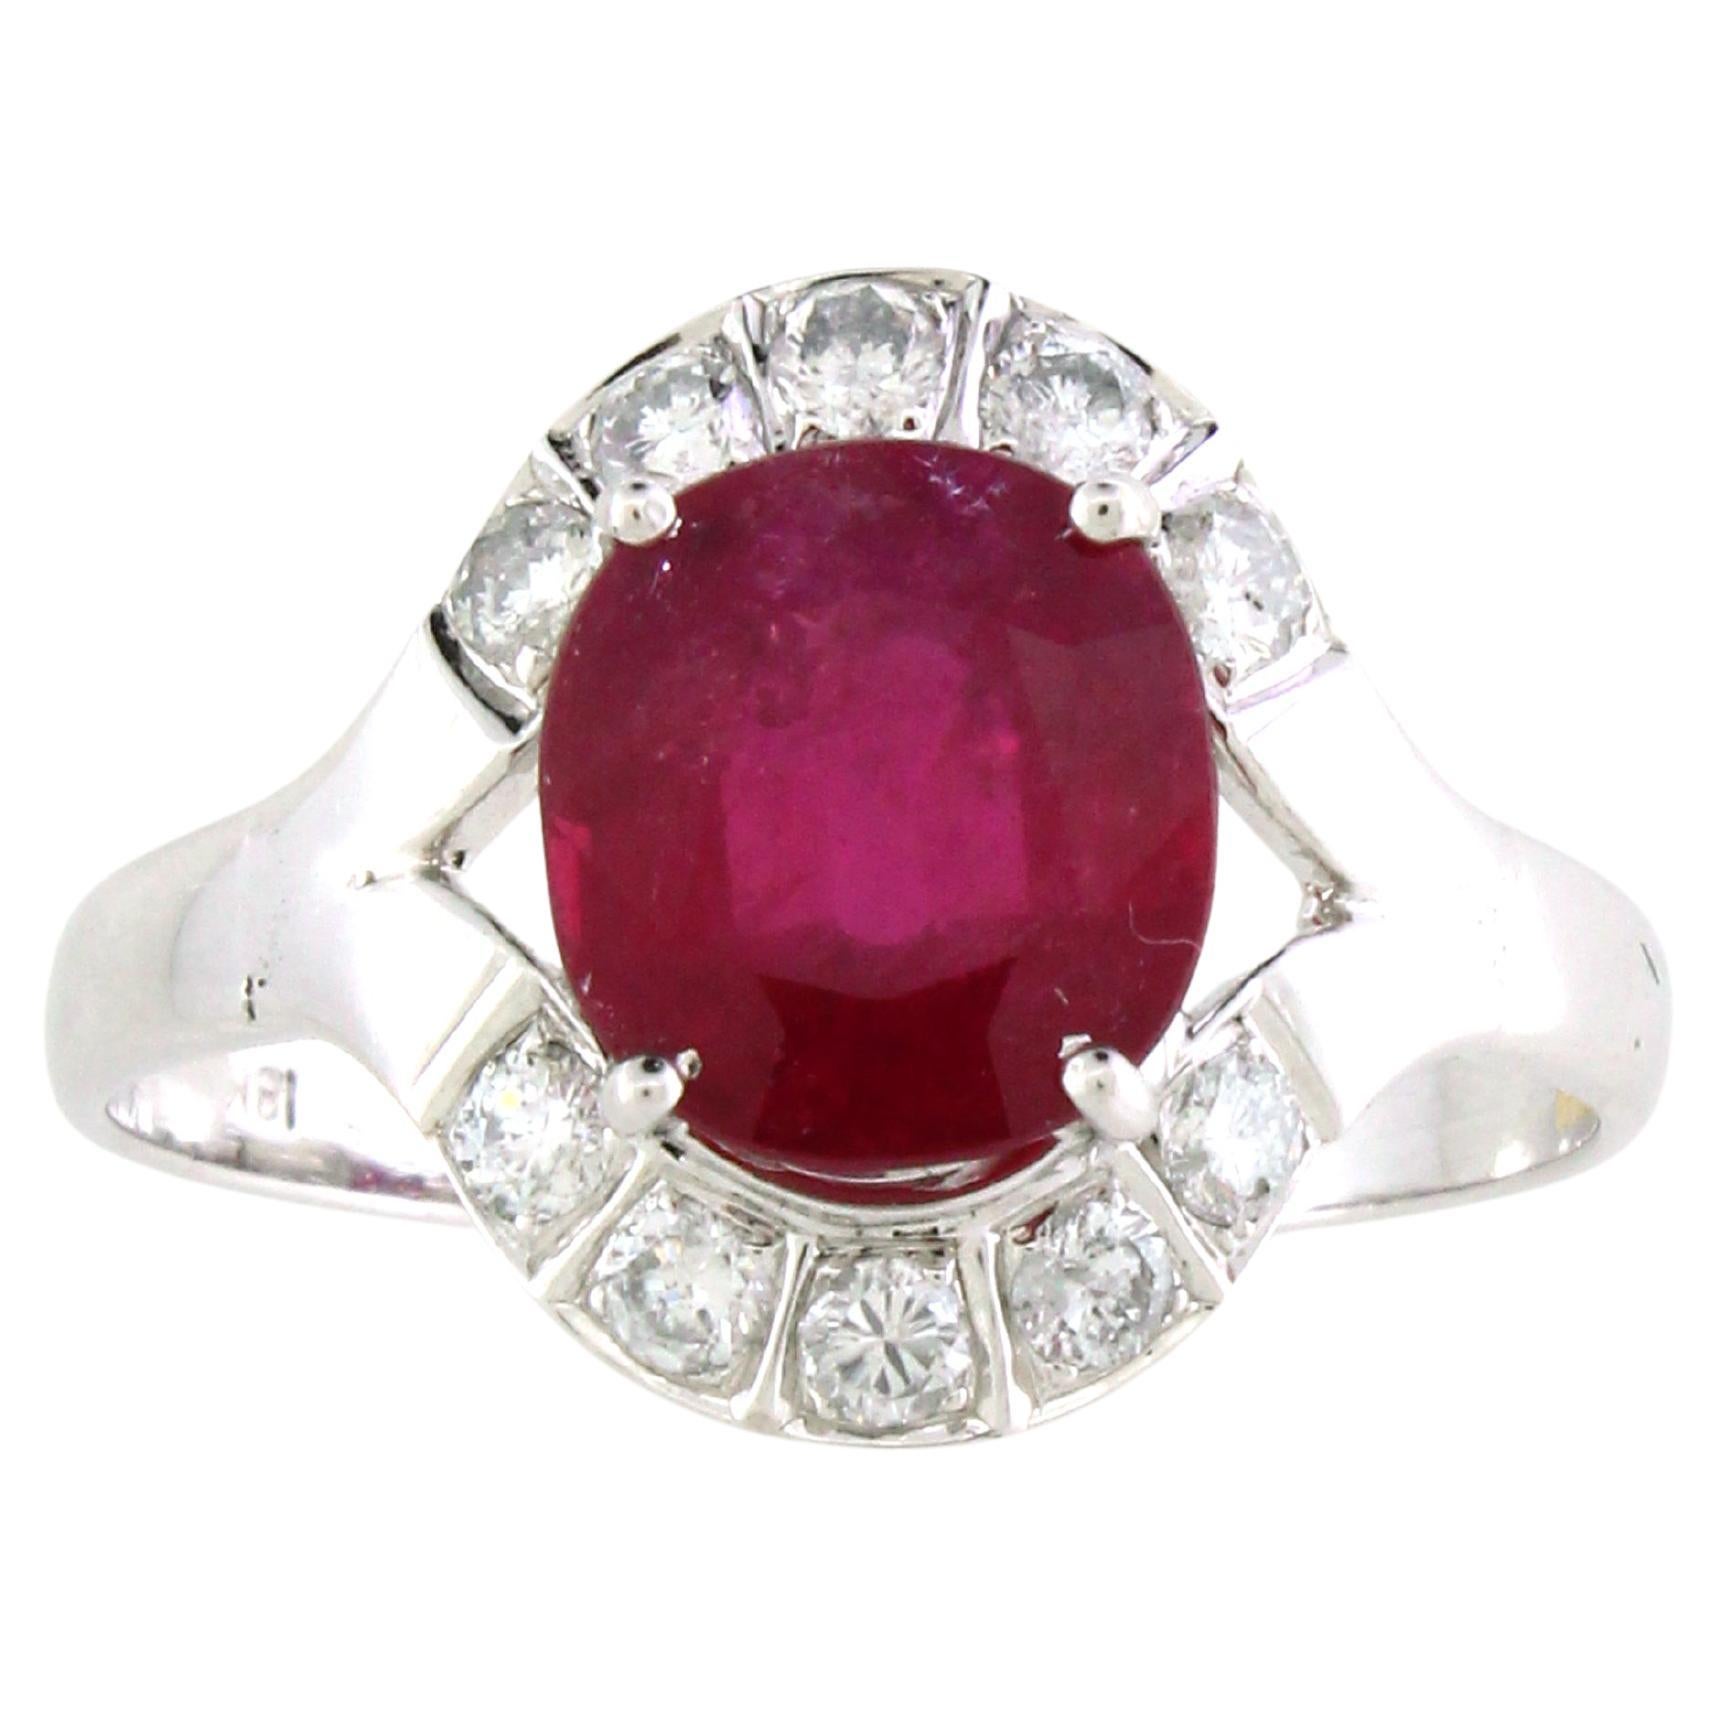 3.48 carats of Ruby ring 